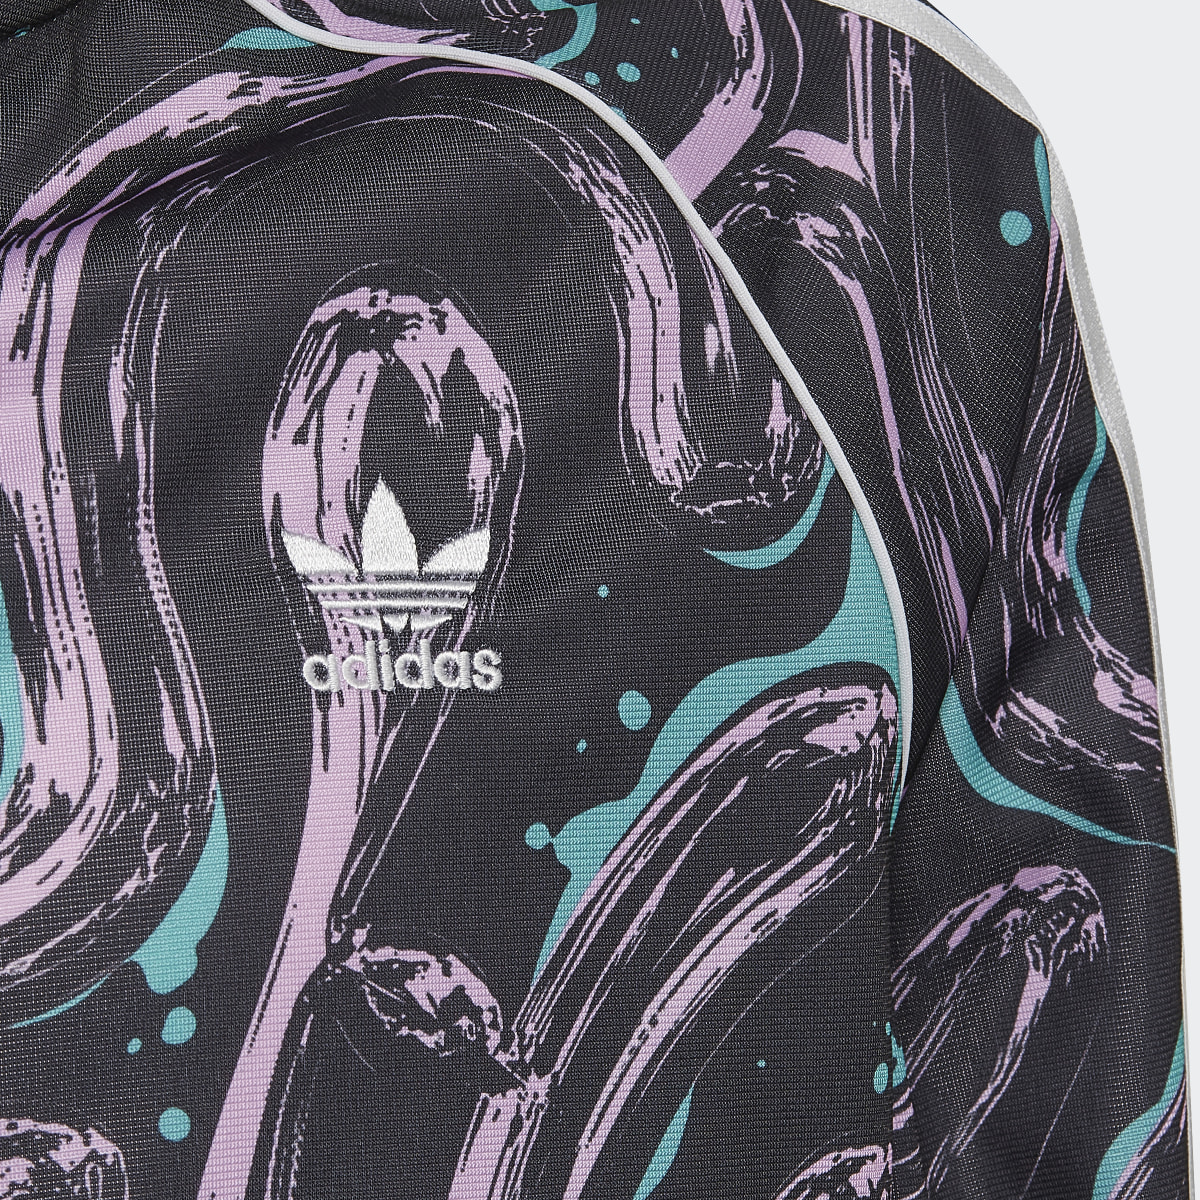 Adidas Allover Print SST Track Top. 4